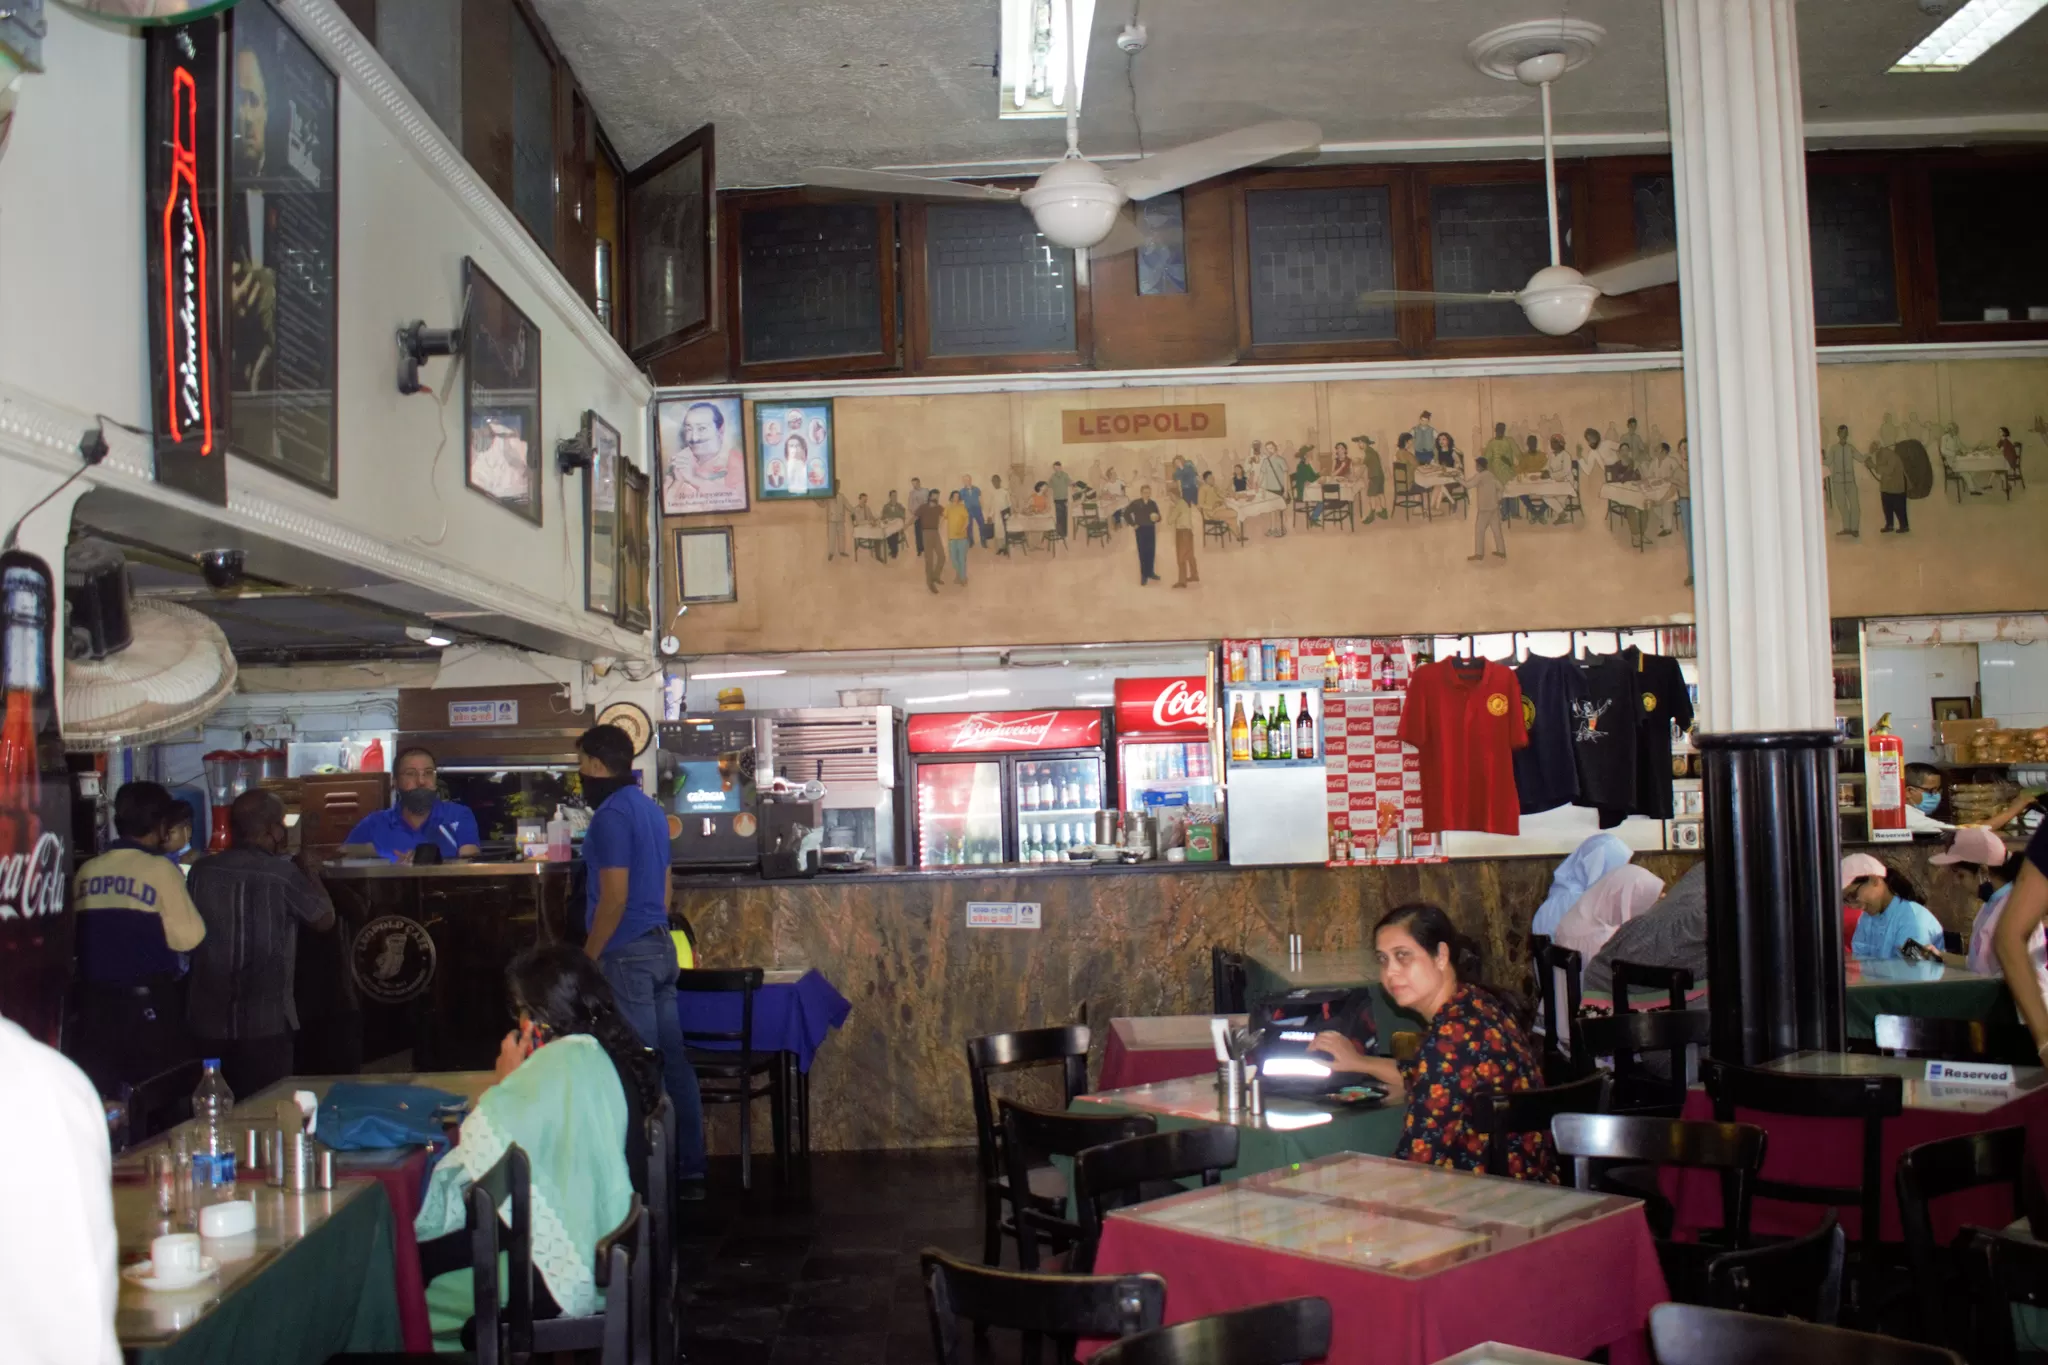 Visited the oldest restaurants in Asia? Mumbai's Leopold Cafe is one